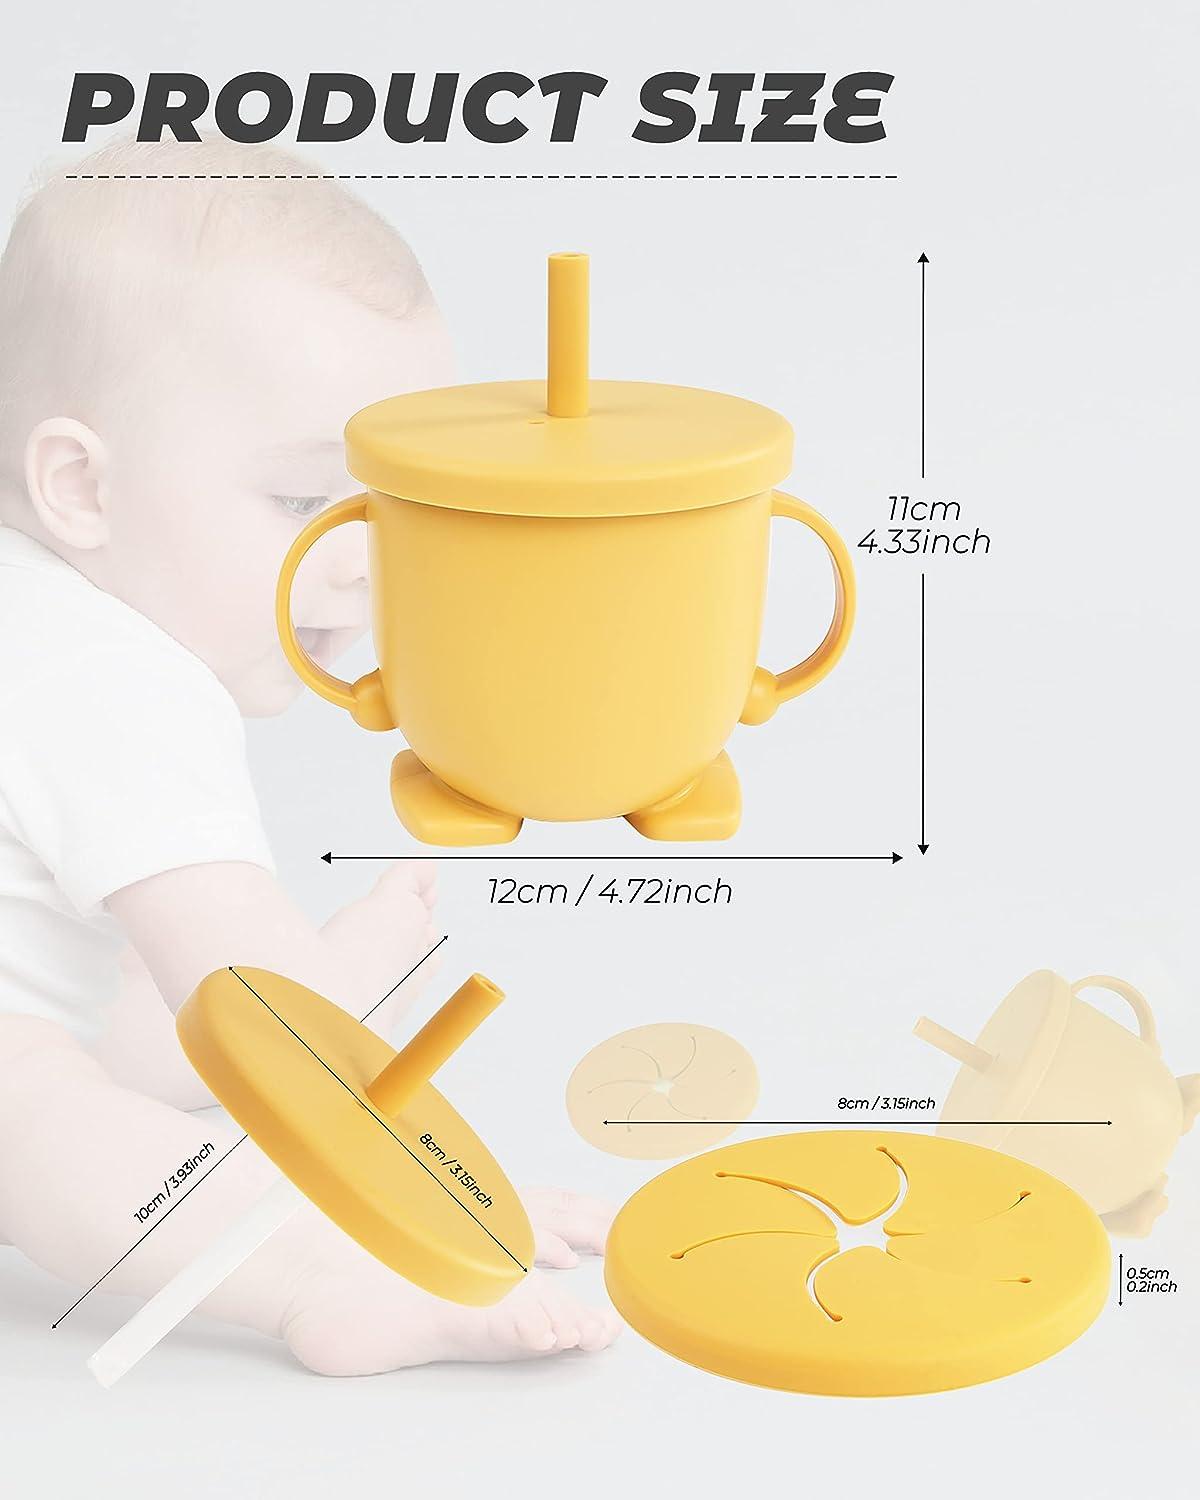 Toddler Straw Cup 100% Food Grade Silicone Training Cup for Baby